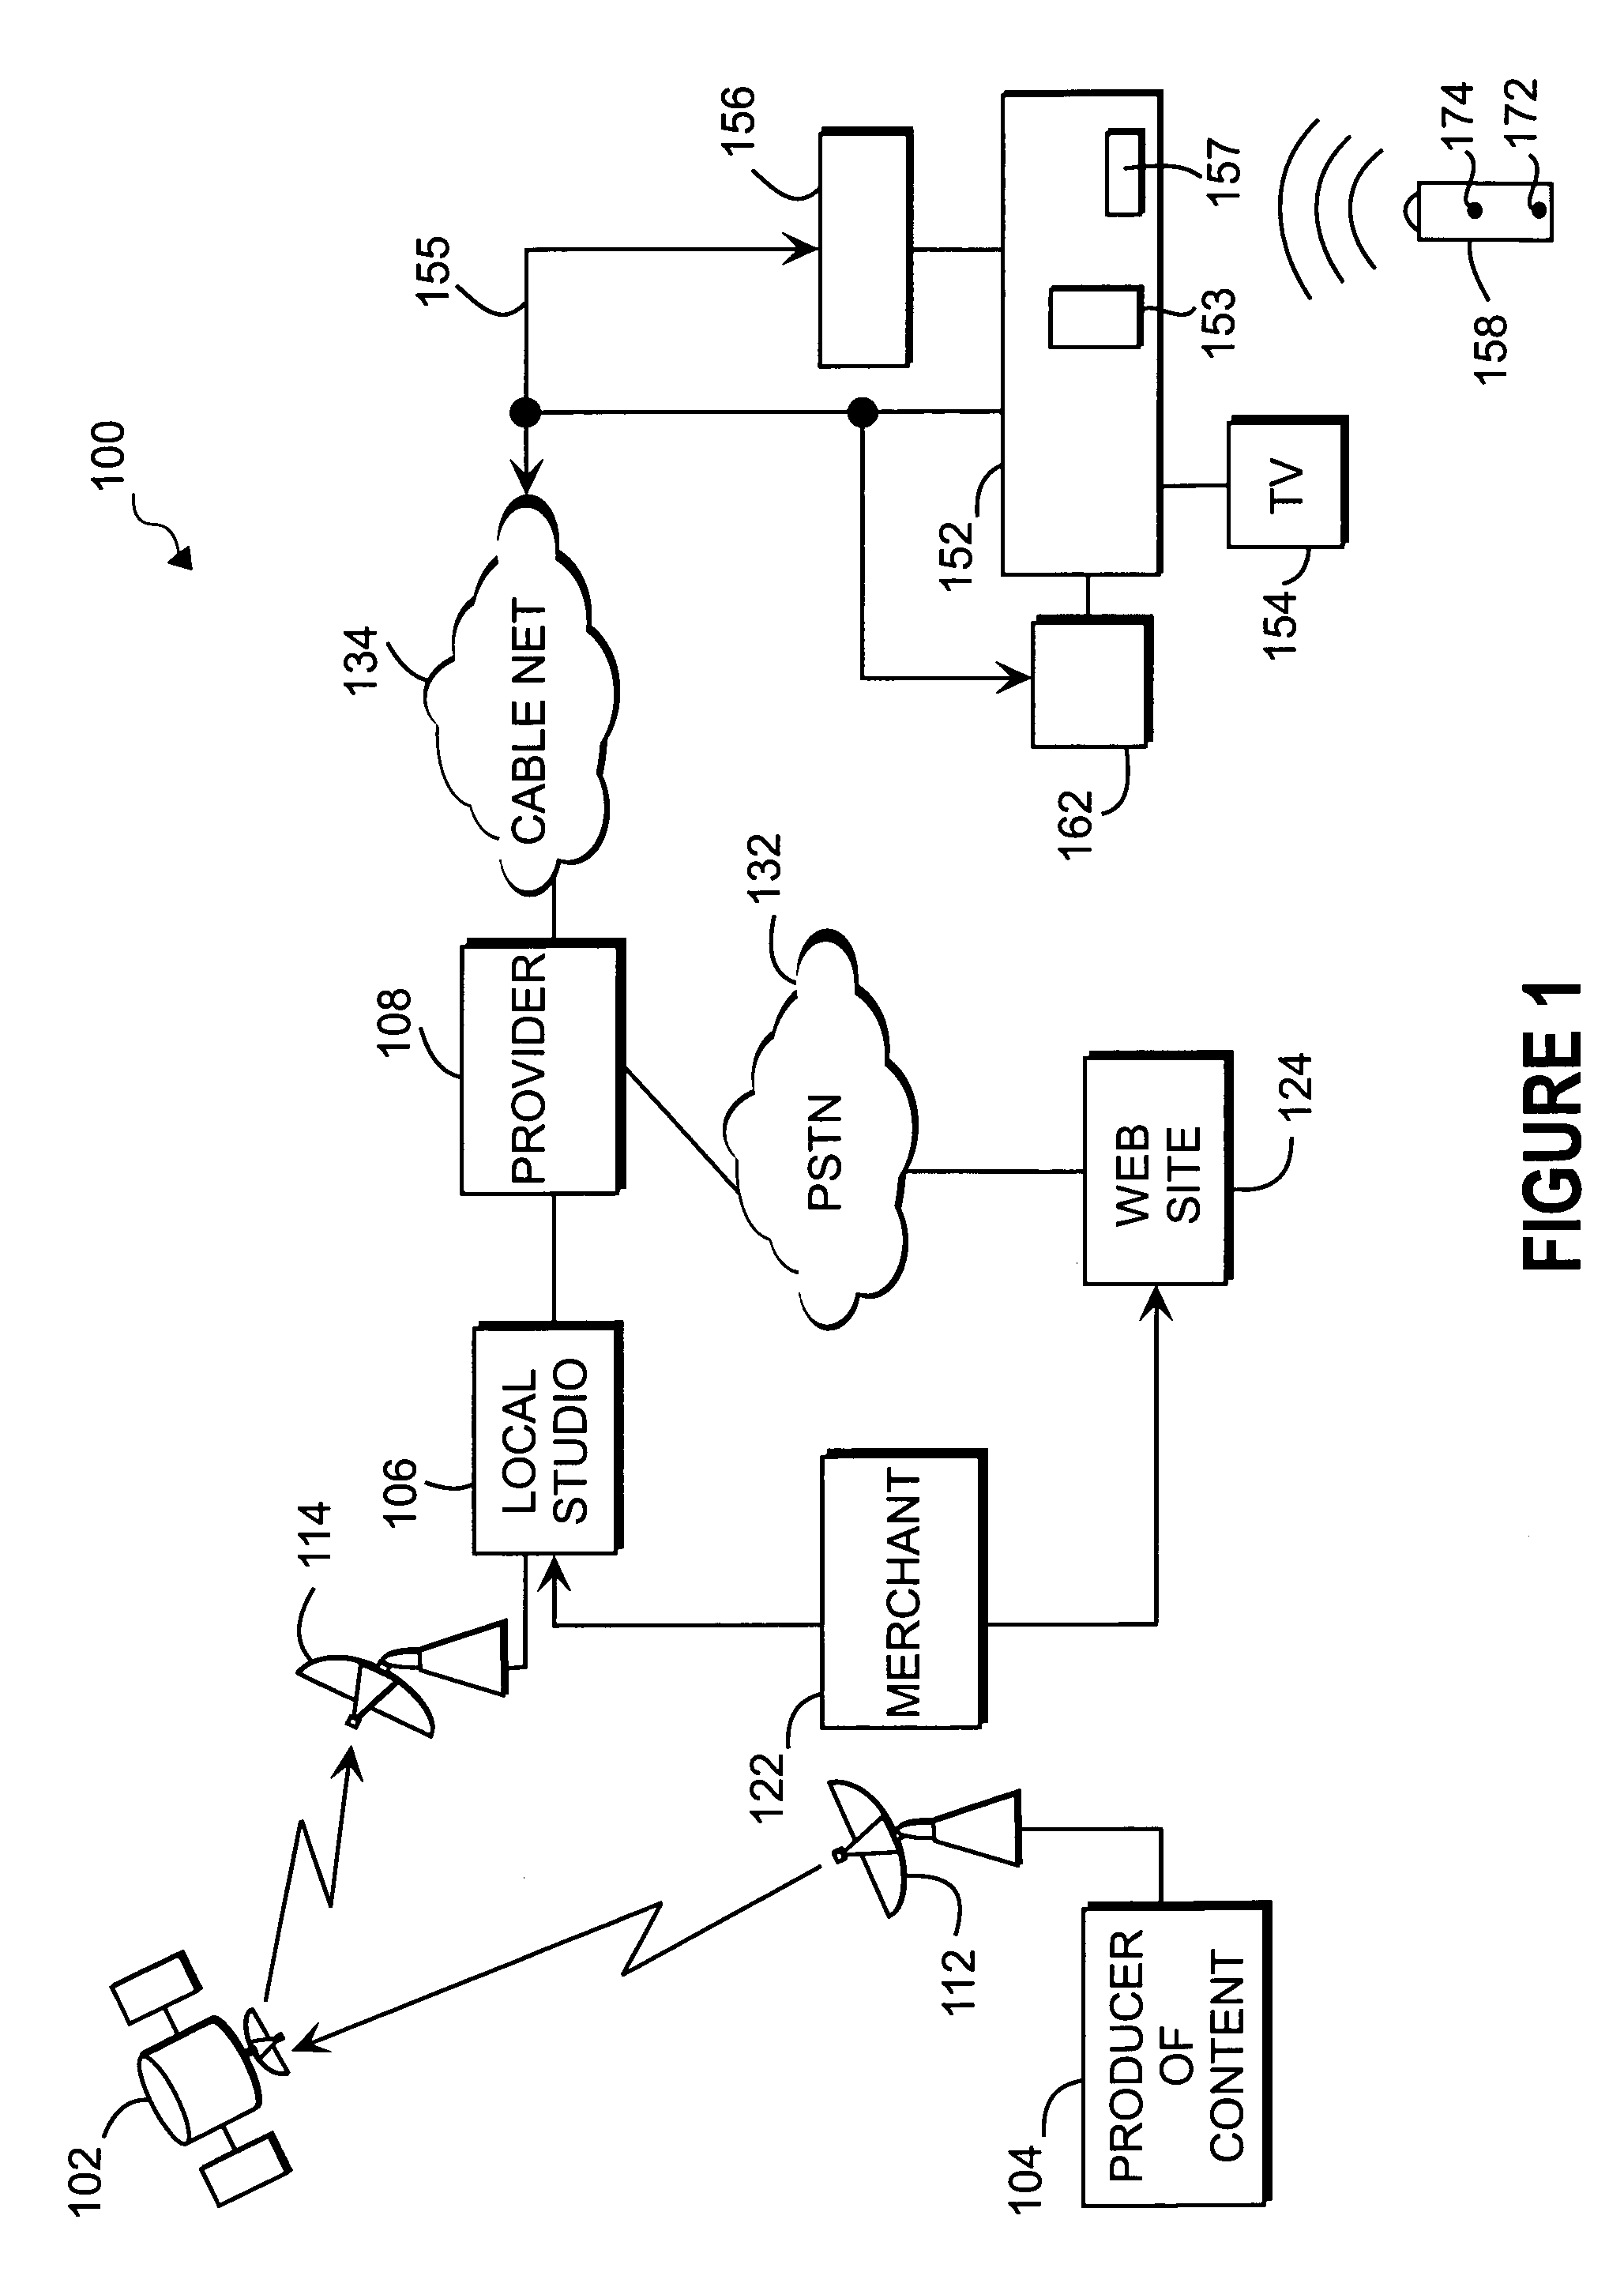 Method and system to defer transactions conducted via interactive television